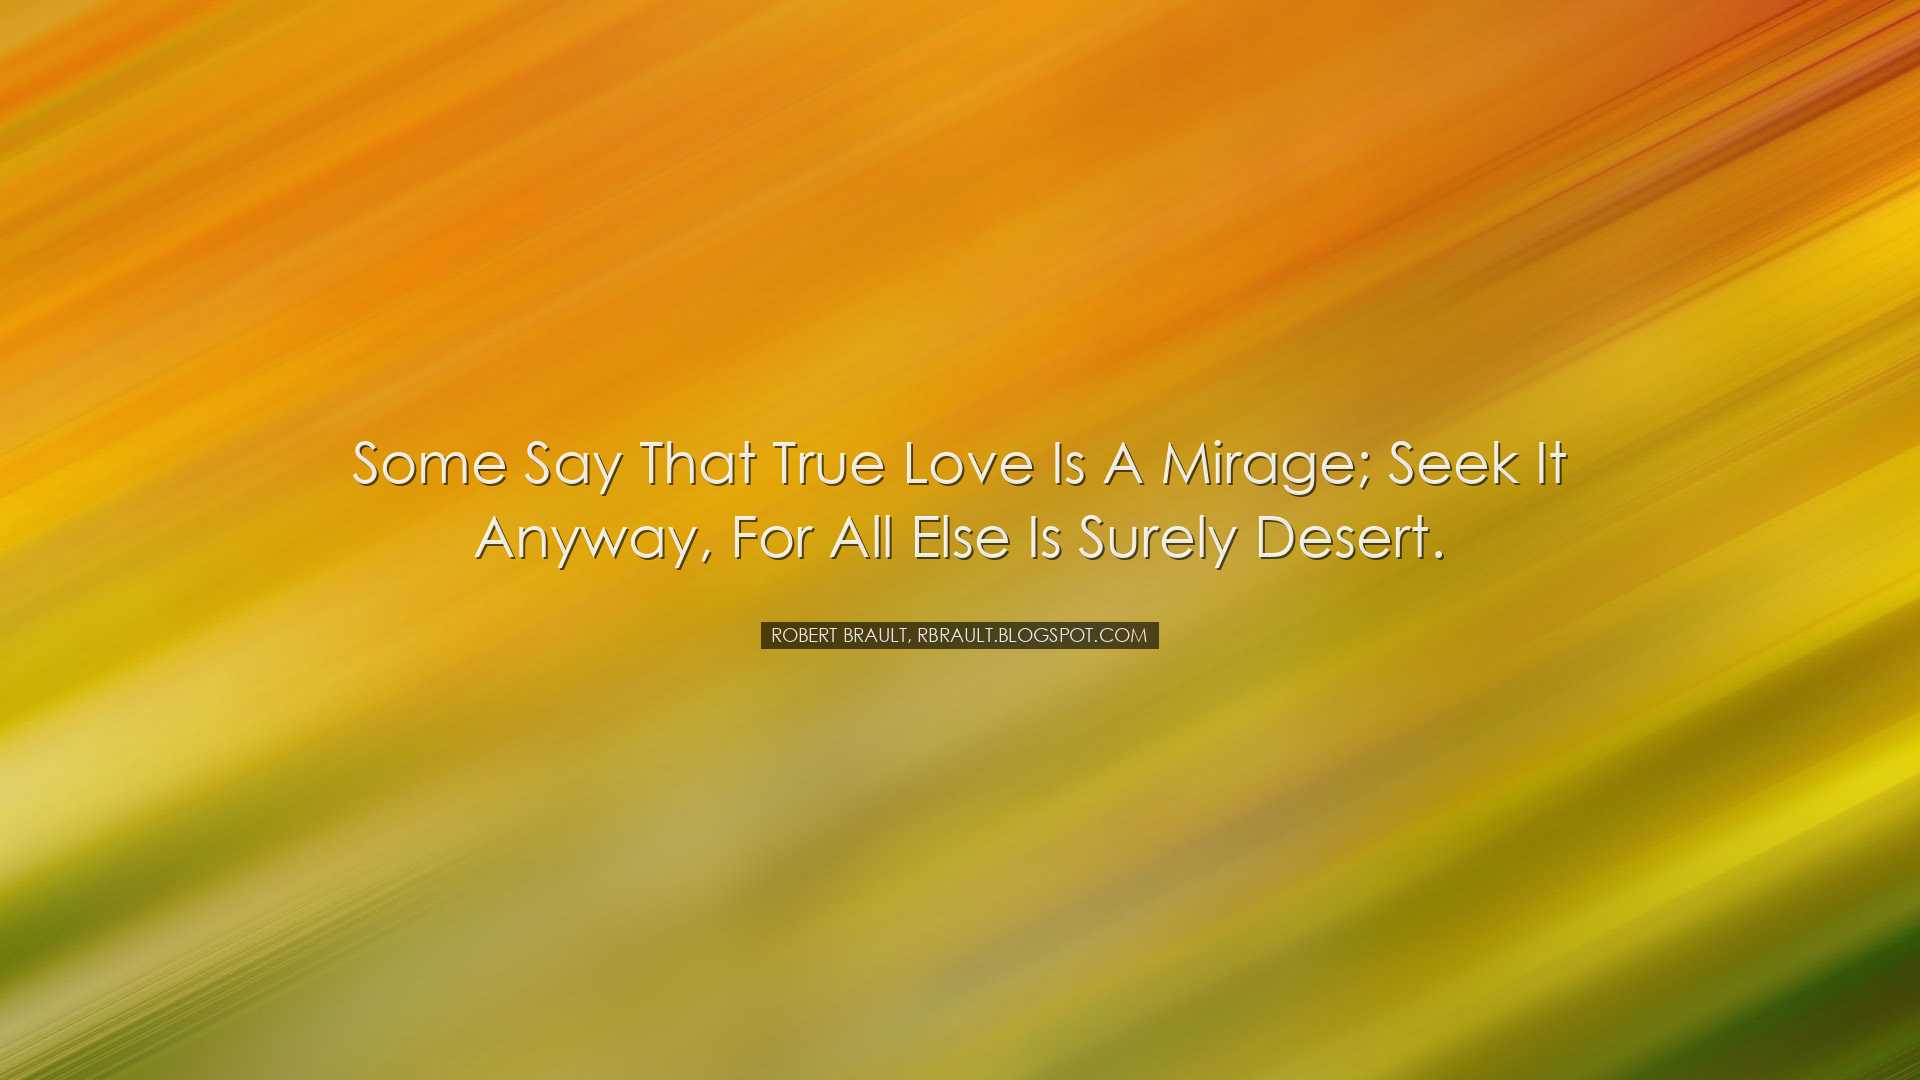 Some say that true love is a mirage; seek it anyway, for all else